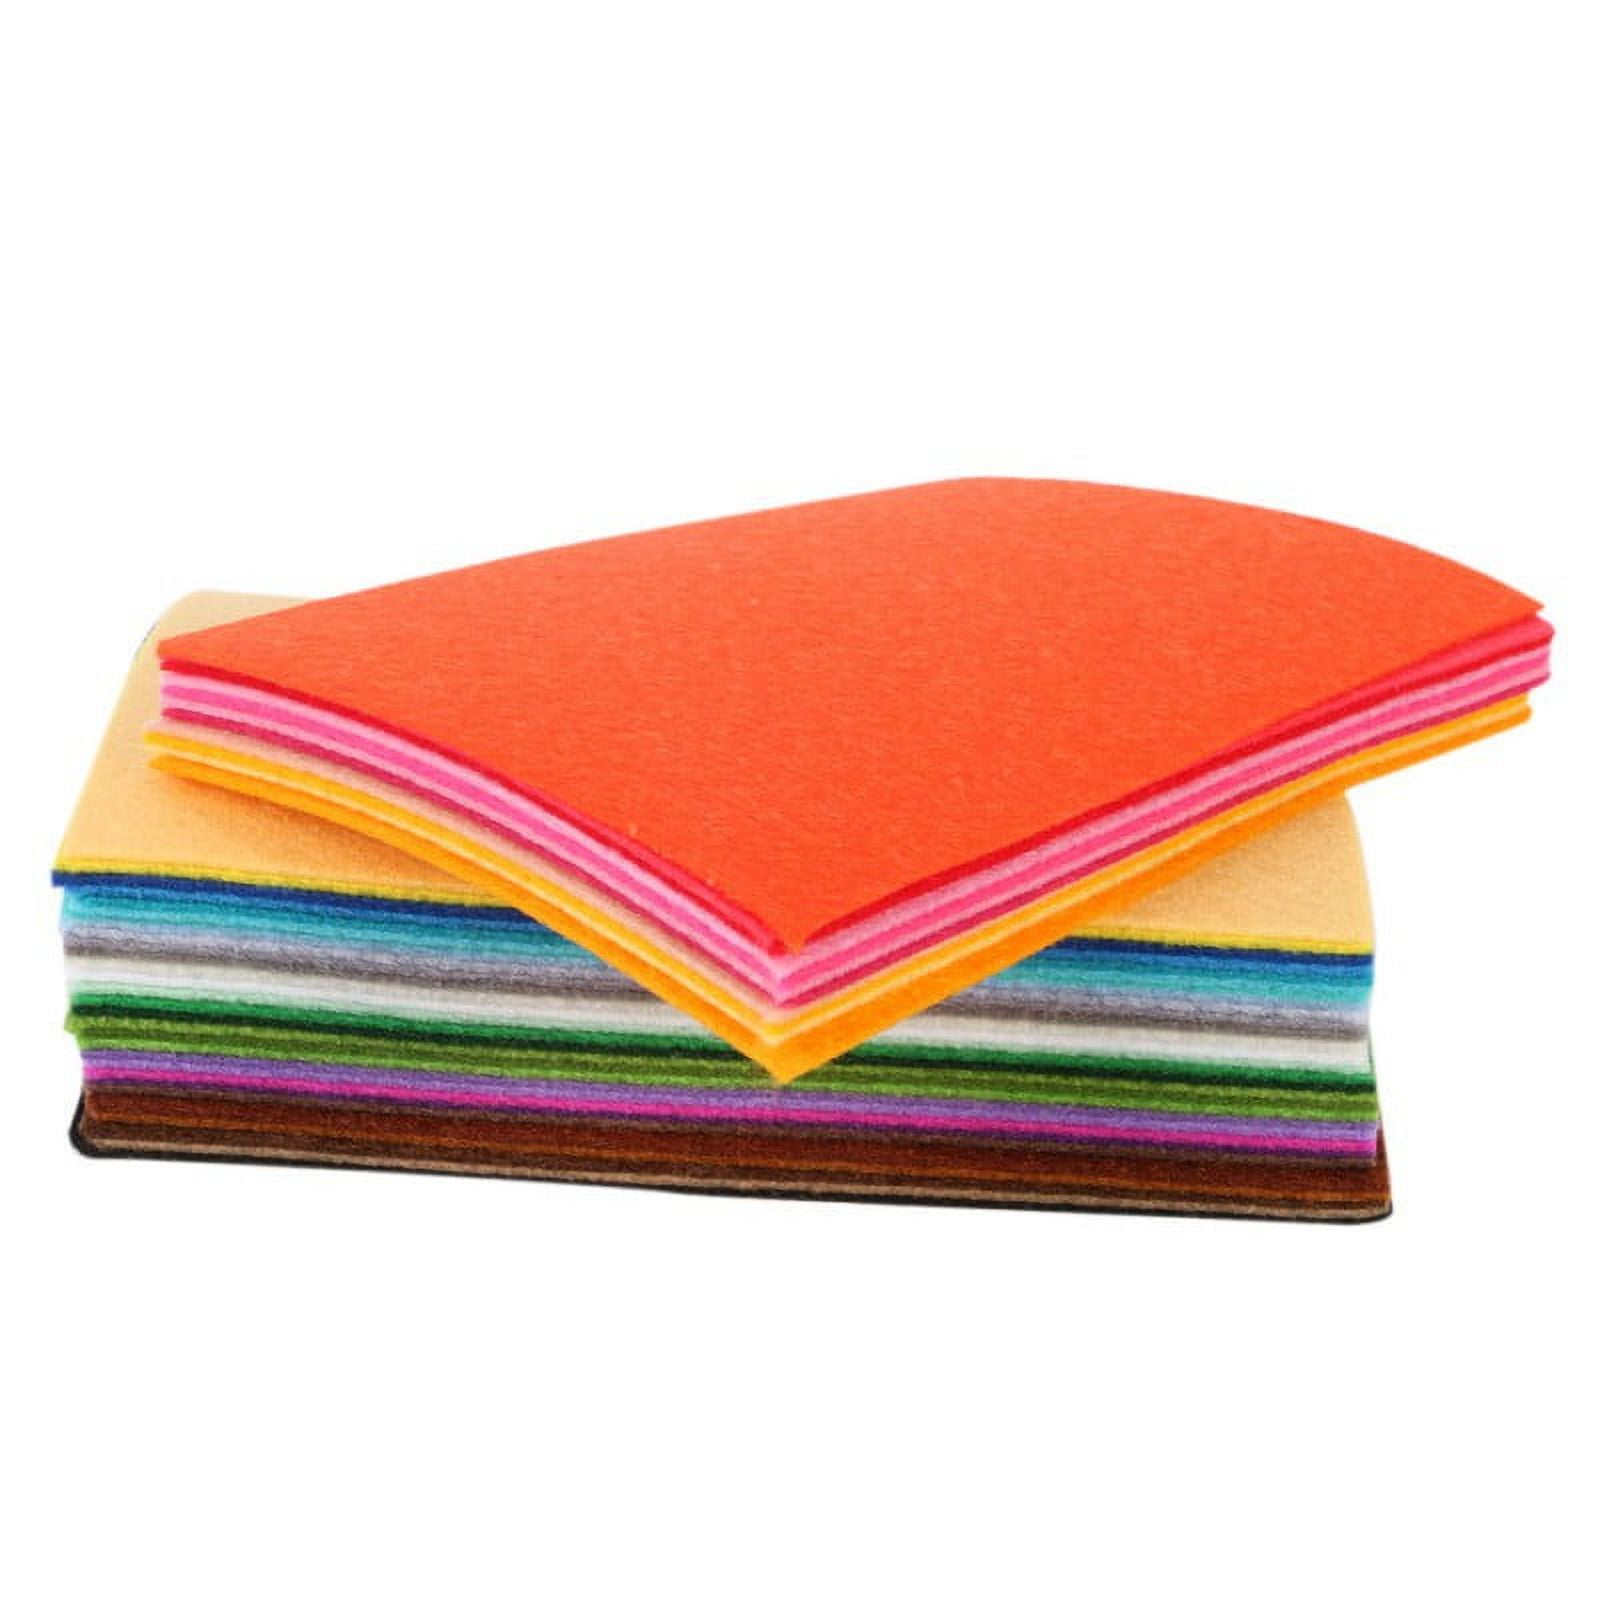 Bastex 50 Pieces Colored Craft Felt Fabric Sheets. 6 x 6 Inches with 1mm  Thickness. Many Assorted Colors Pack for DIY Crafts. Stiff Sewing Material  Squares for Patchwork. 